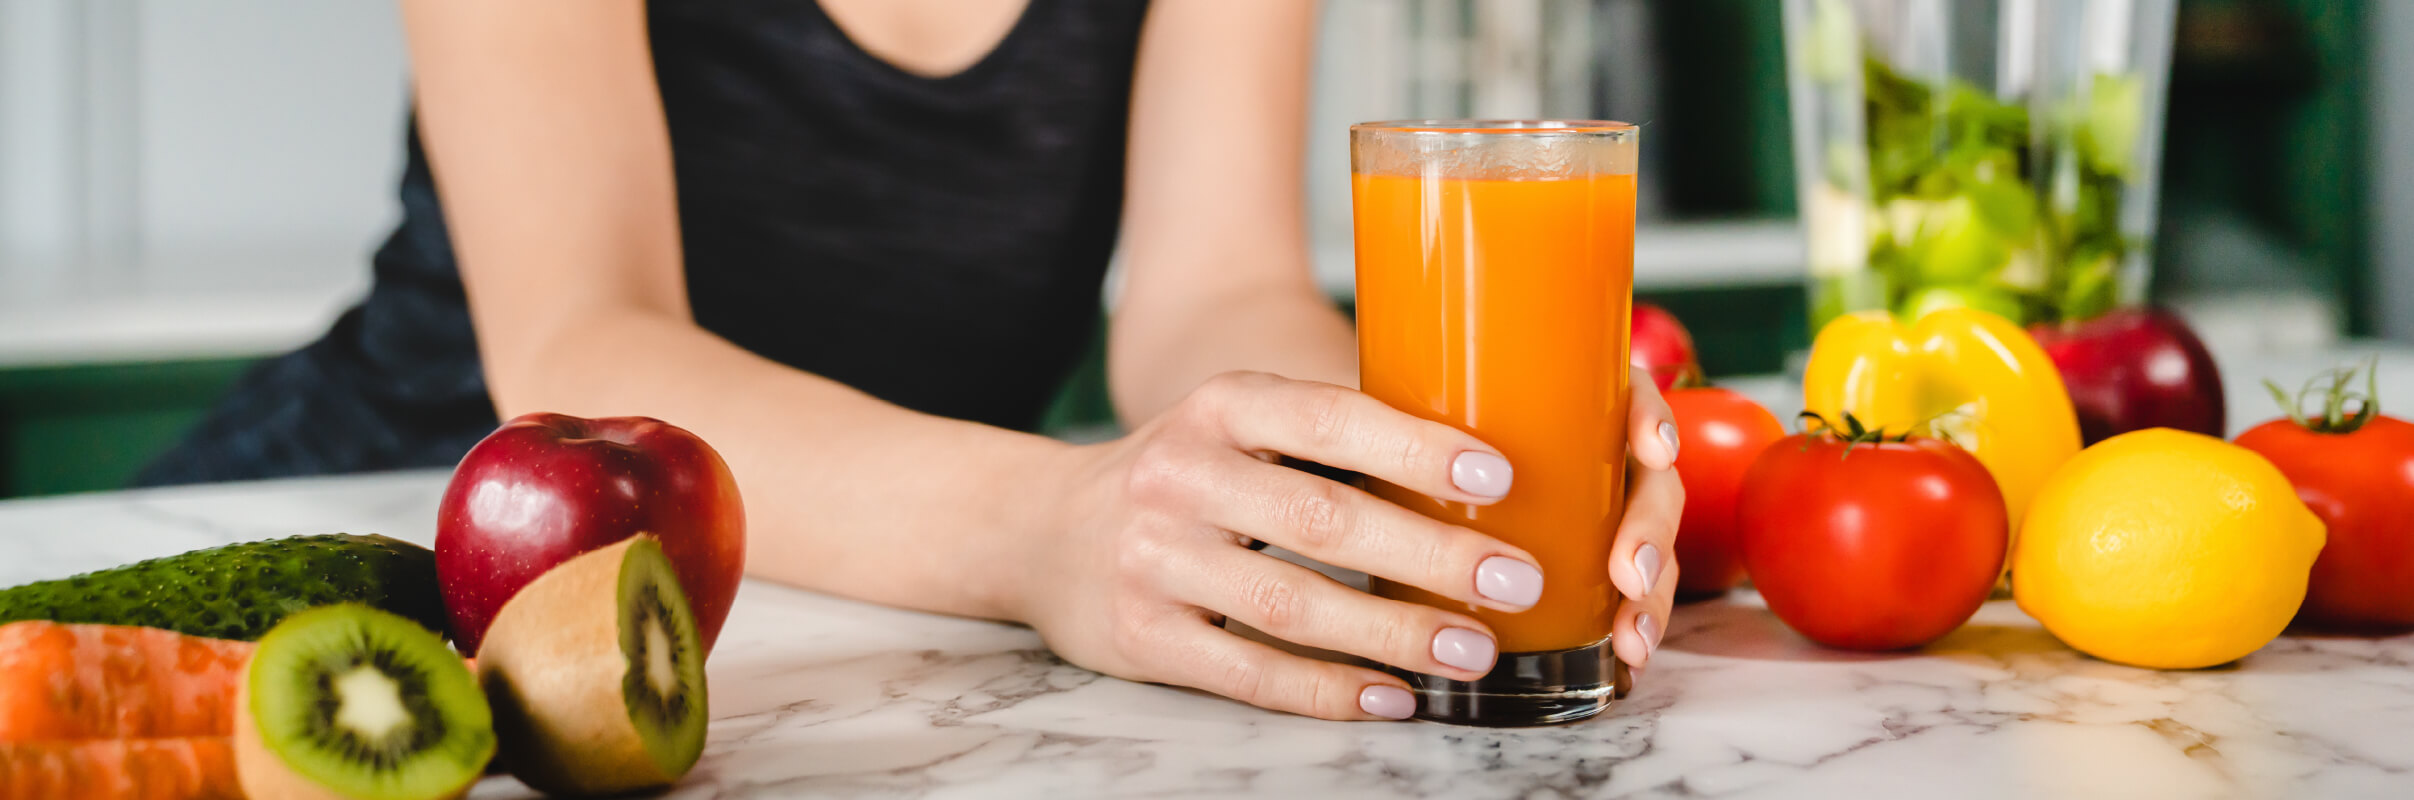 Close up of womans hands around a smoothie in a clear glass resting on kitchen counter with colorful fruits and vegetables sitting nearby